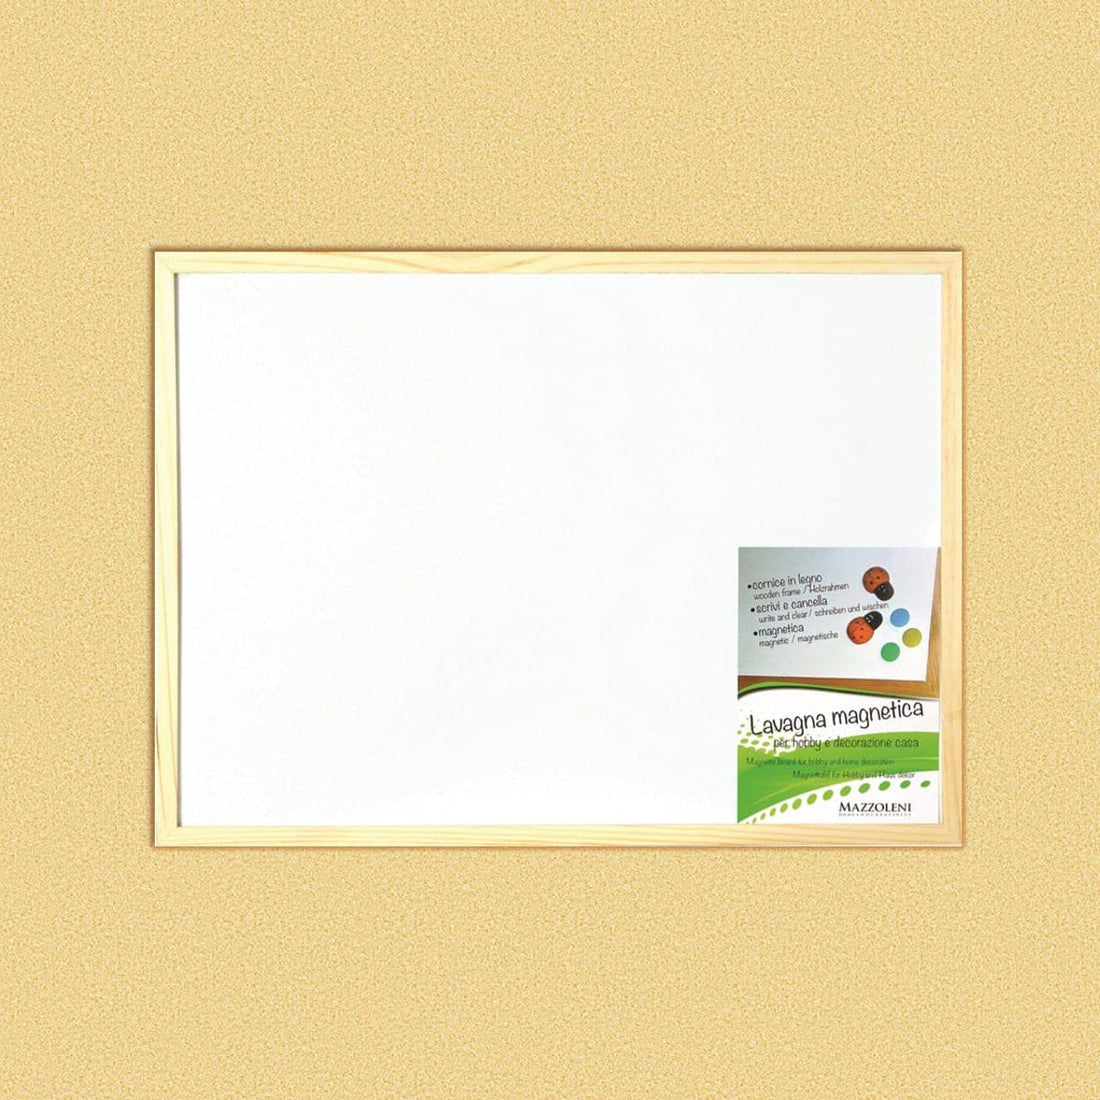 30X45CM PVC MAGNETIC BOARD WITH WOODEN FRAME - best price from Maltashopper.com BR480770031